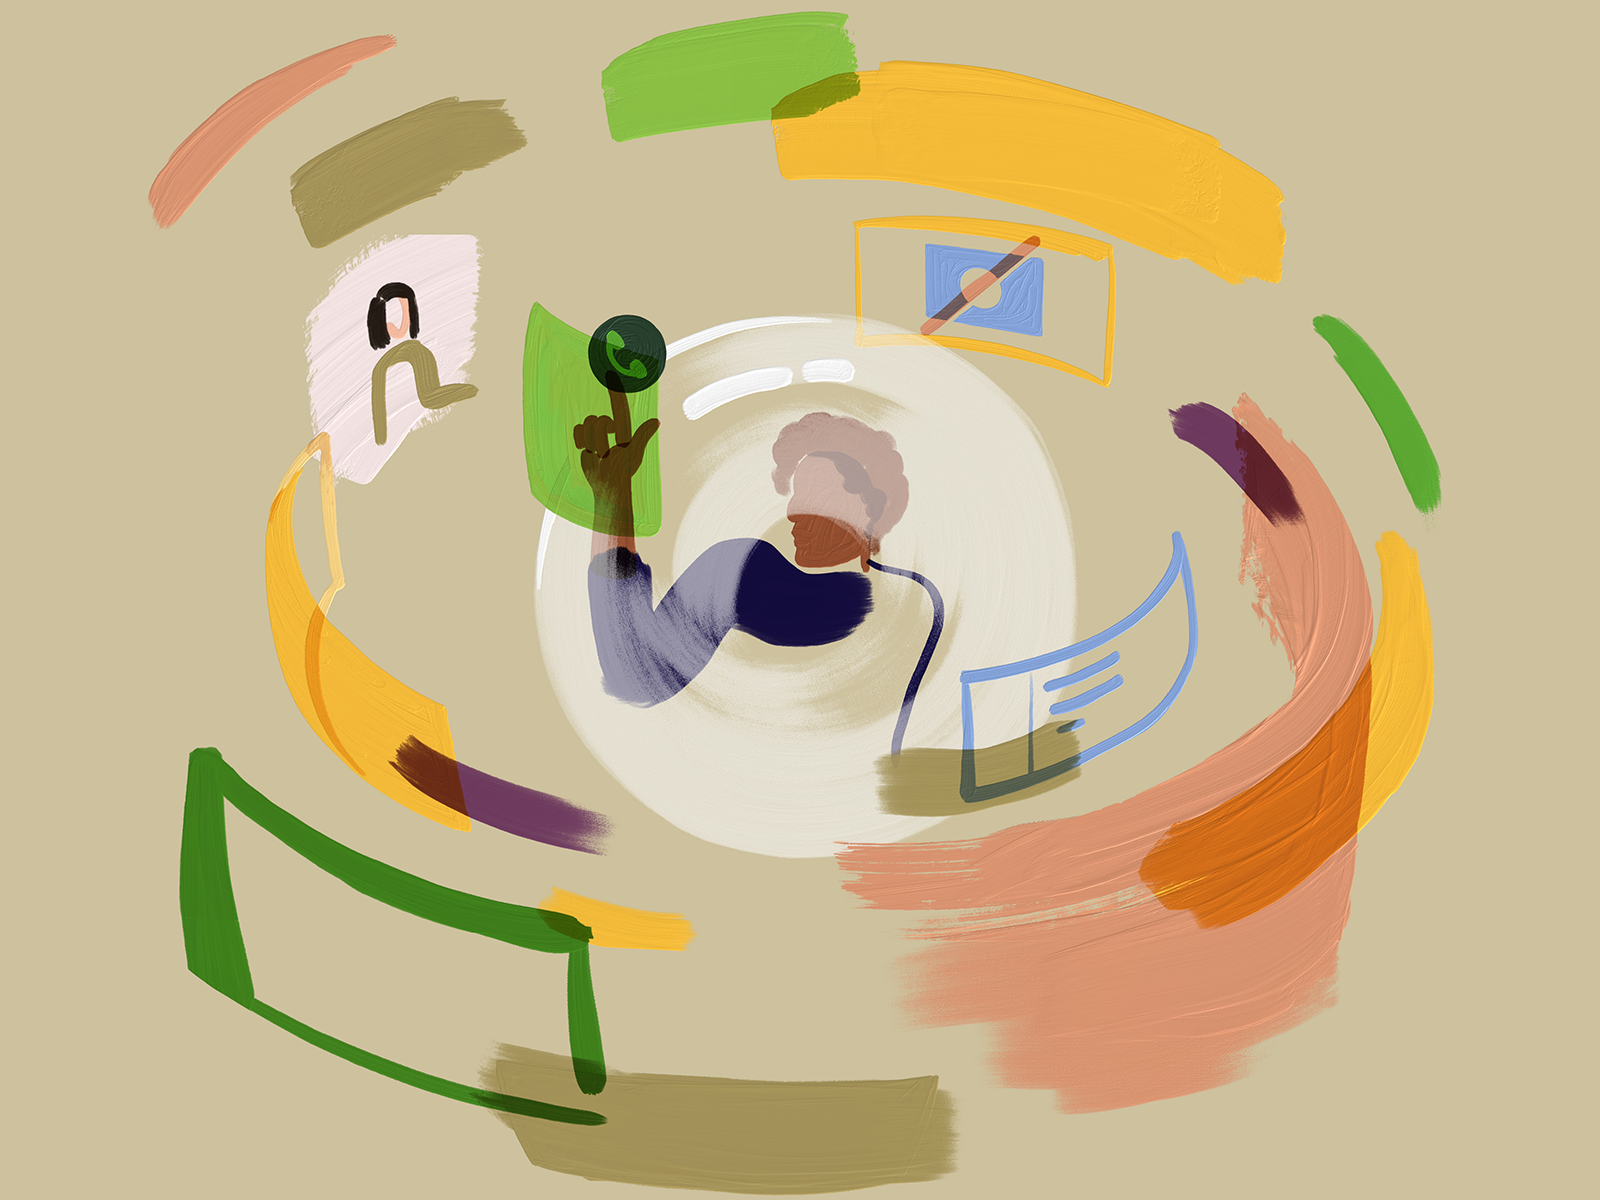 Onboarding during a pandemic - Blog cover 2020 adobe fresco blog cover bubble employee illustrations isolation meet onboarding pandemic peakon zoom call